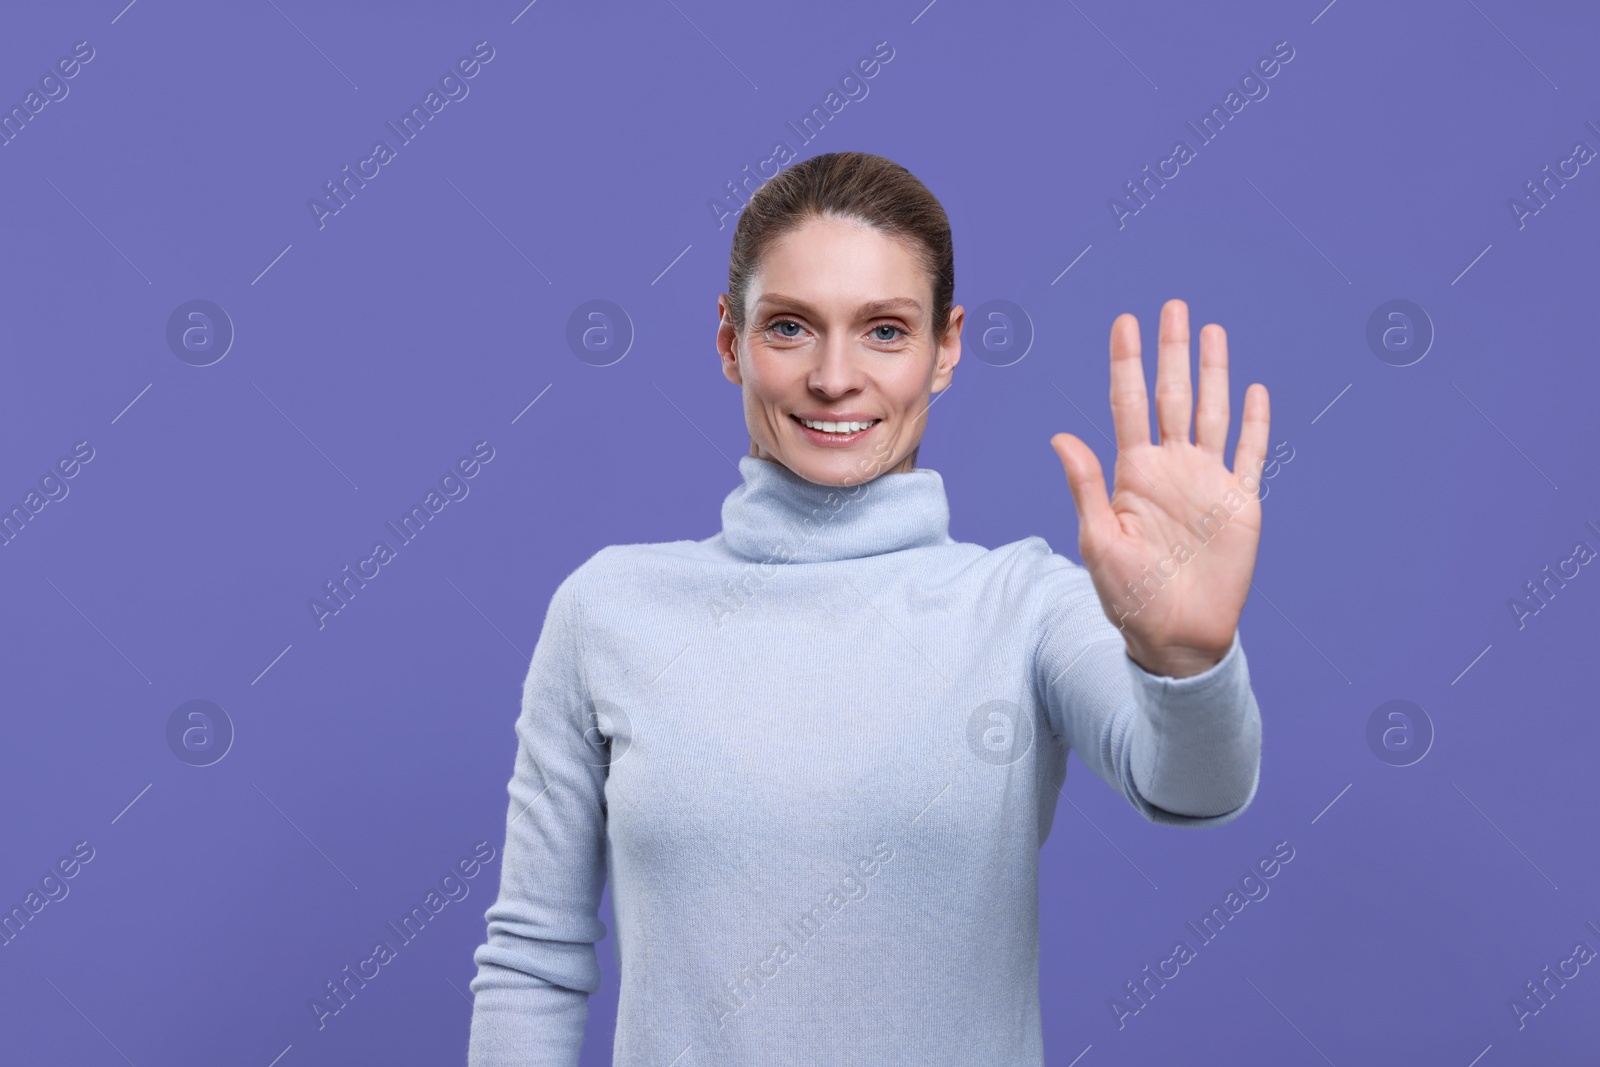 Photo of Woman giving high five on purple background